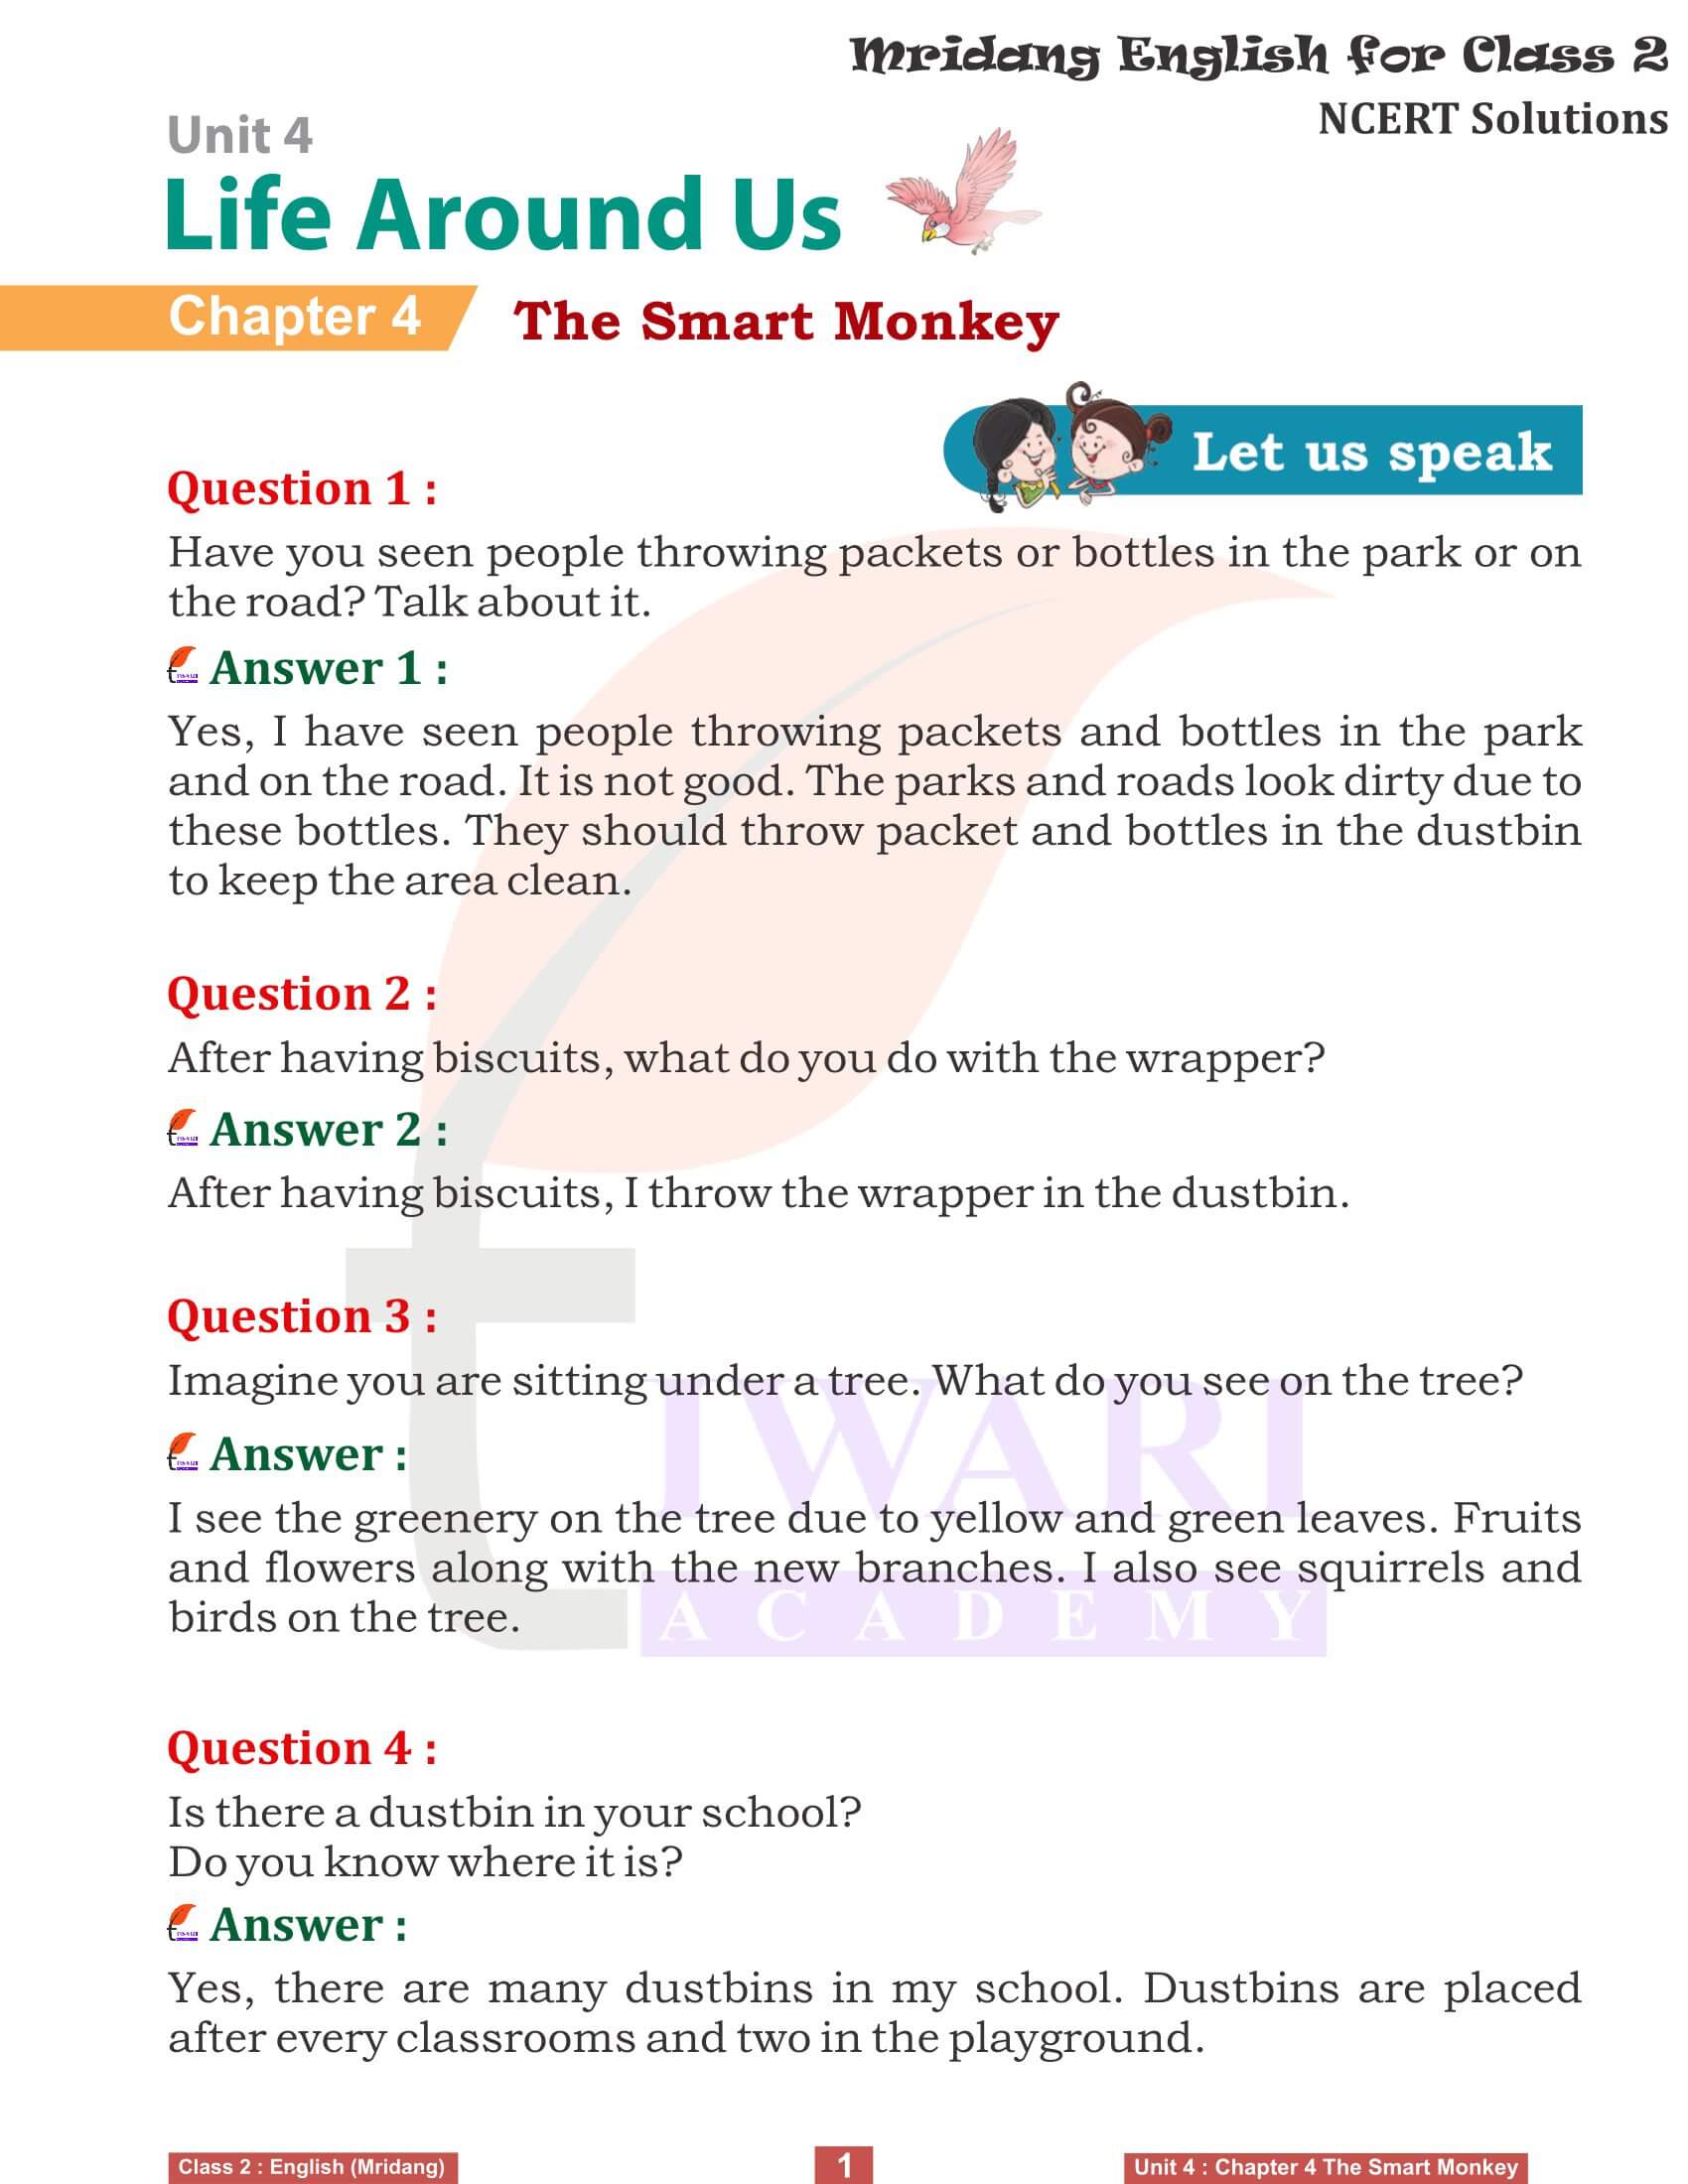 NCERT Solutions for Class 2 English Mridang Unit 4 Life Around Us Chapter 4 The Smart Monkey.